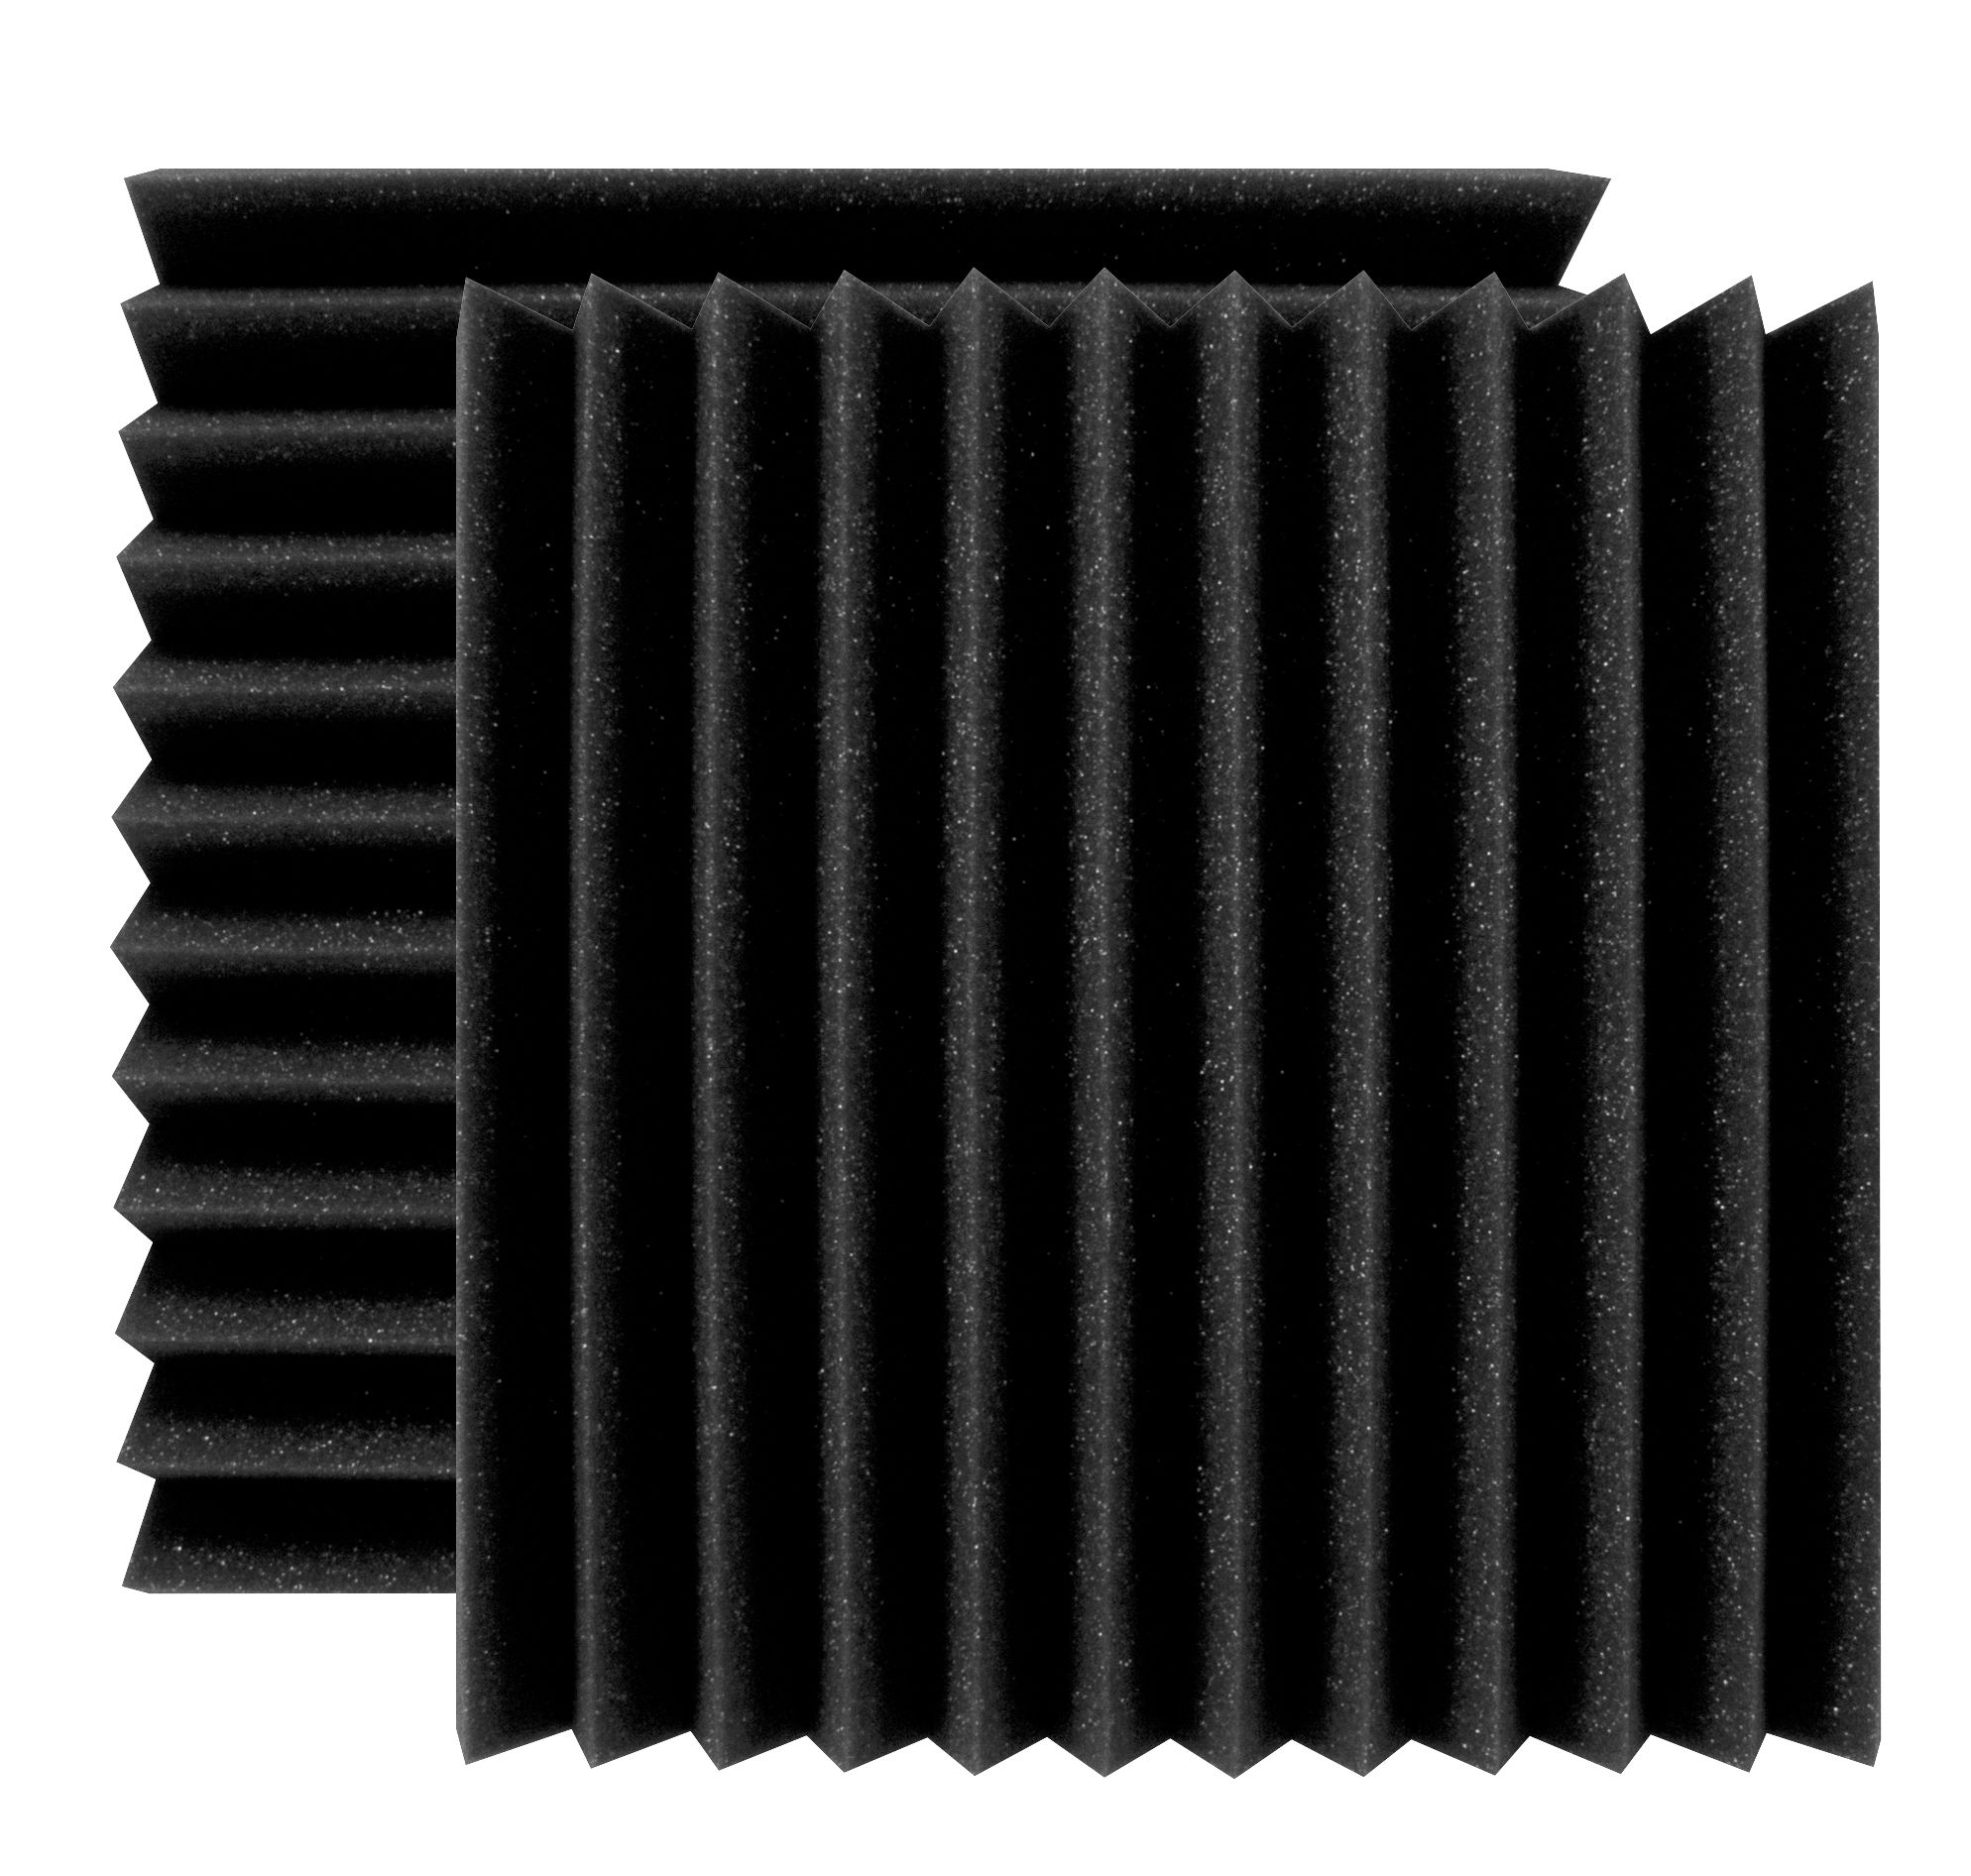 ultimate-support-ua-wpw-1224--24-pack-of-12x12in-sound-absorption-panels.jpg